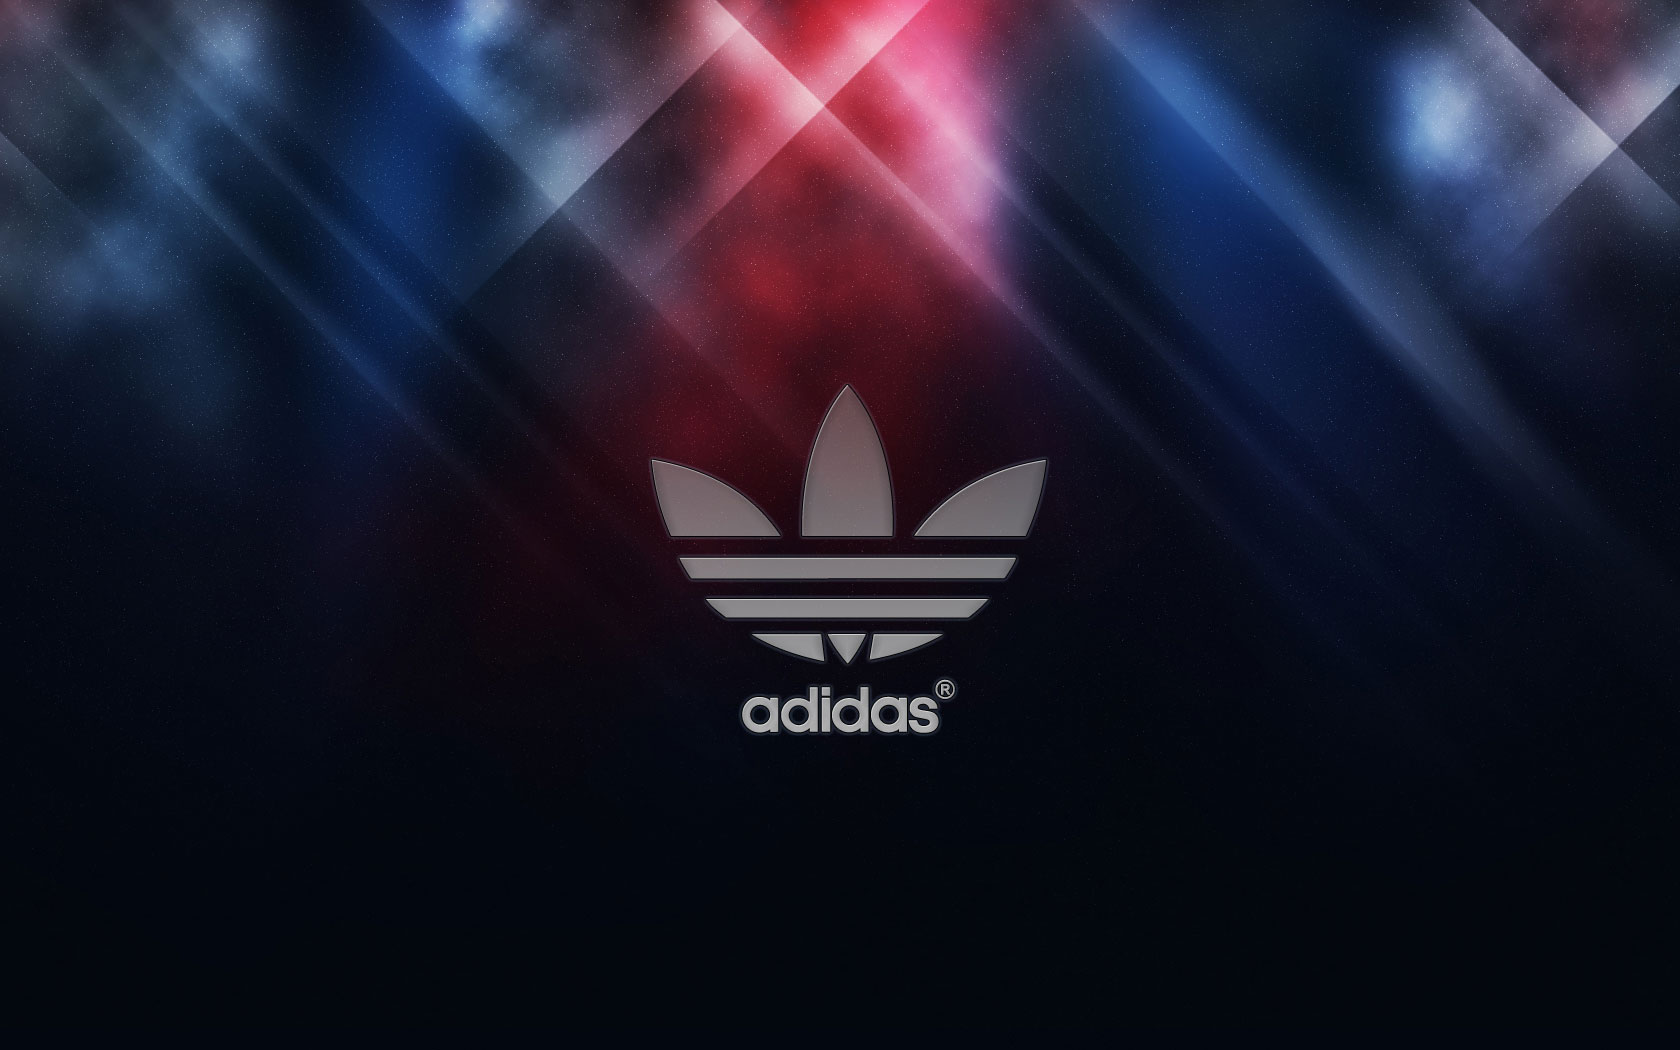  Adidas  Logo Best Wallpapers HD Desktop and Mobile 